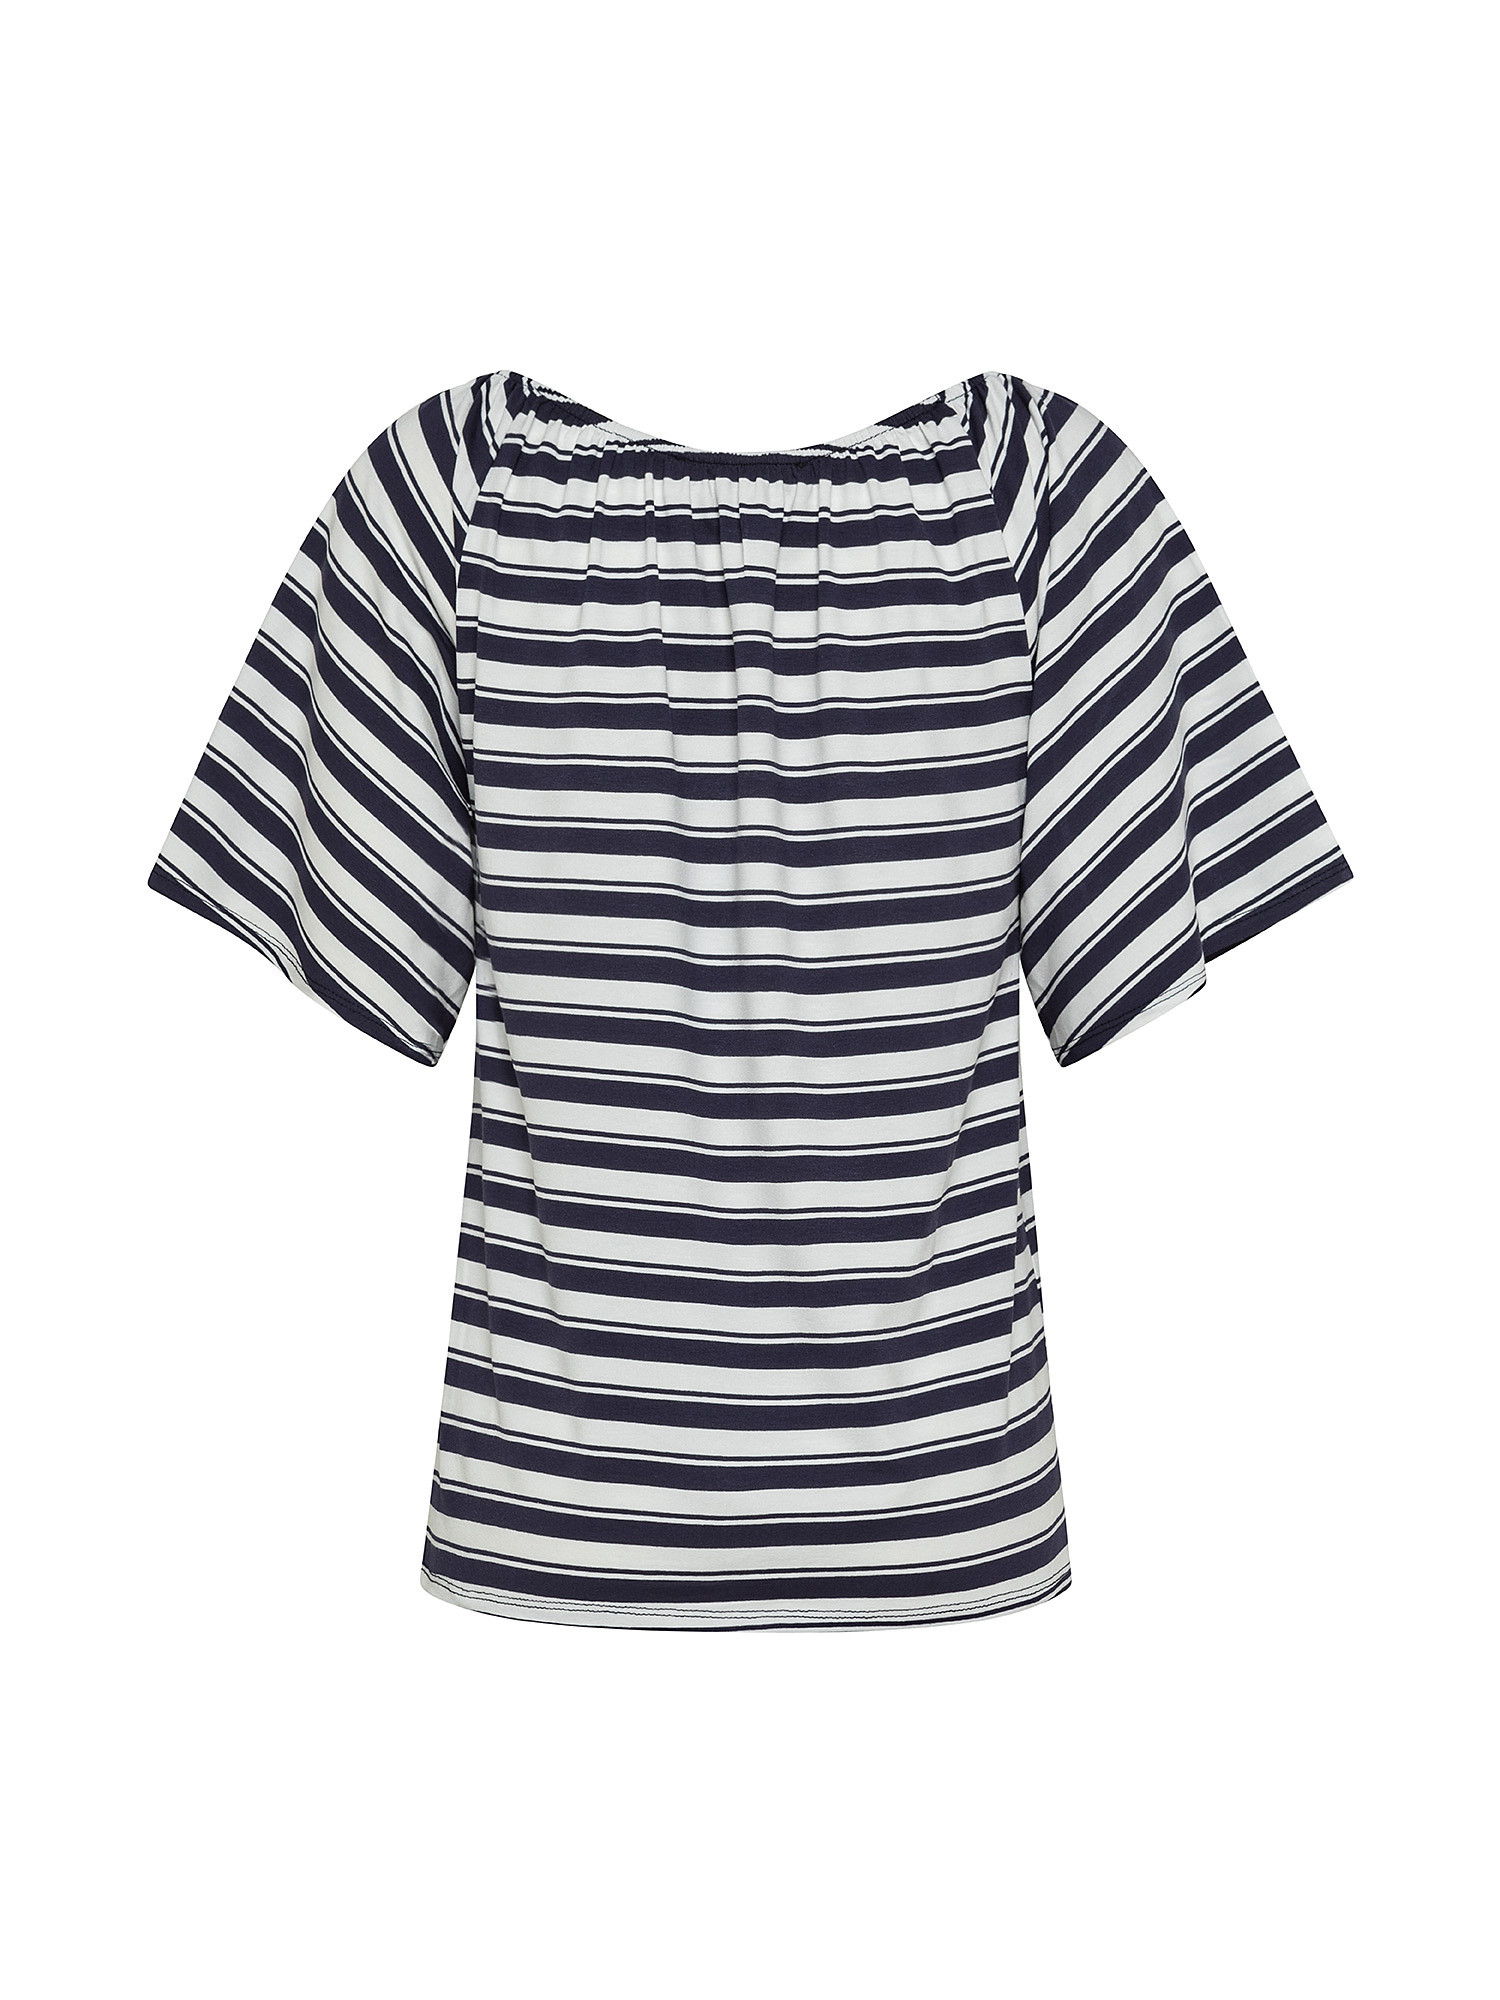 Striped T-shirt, White, large image number 1